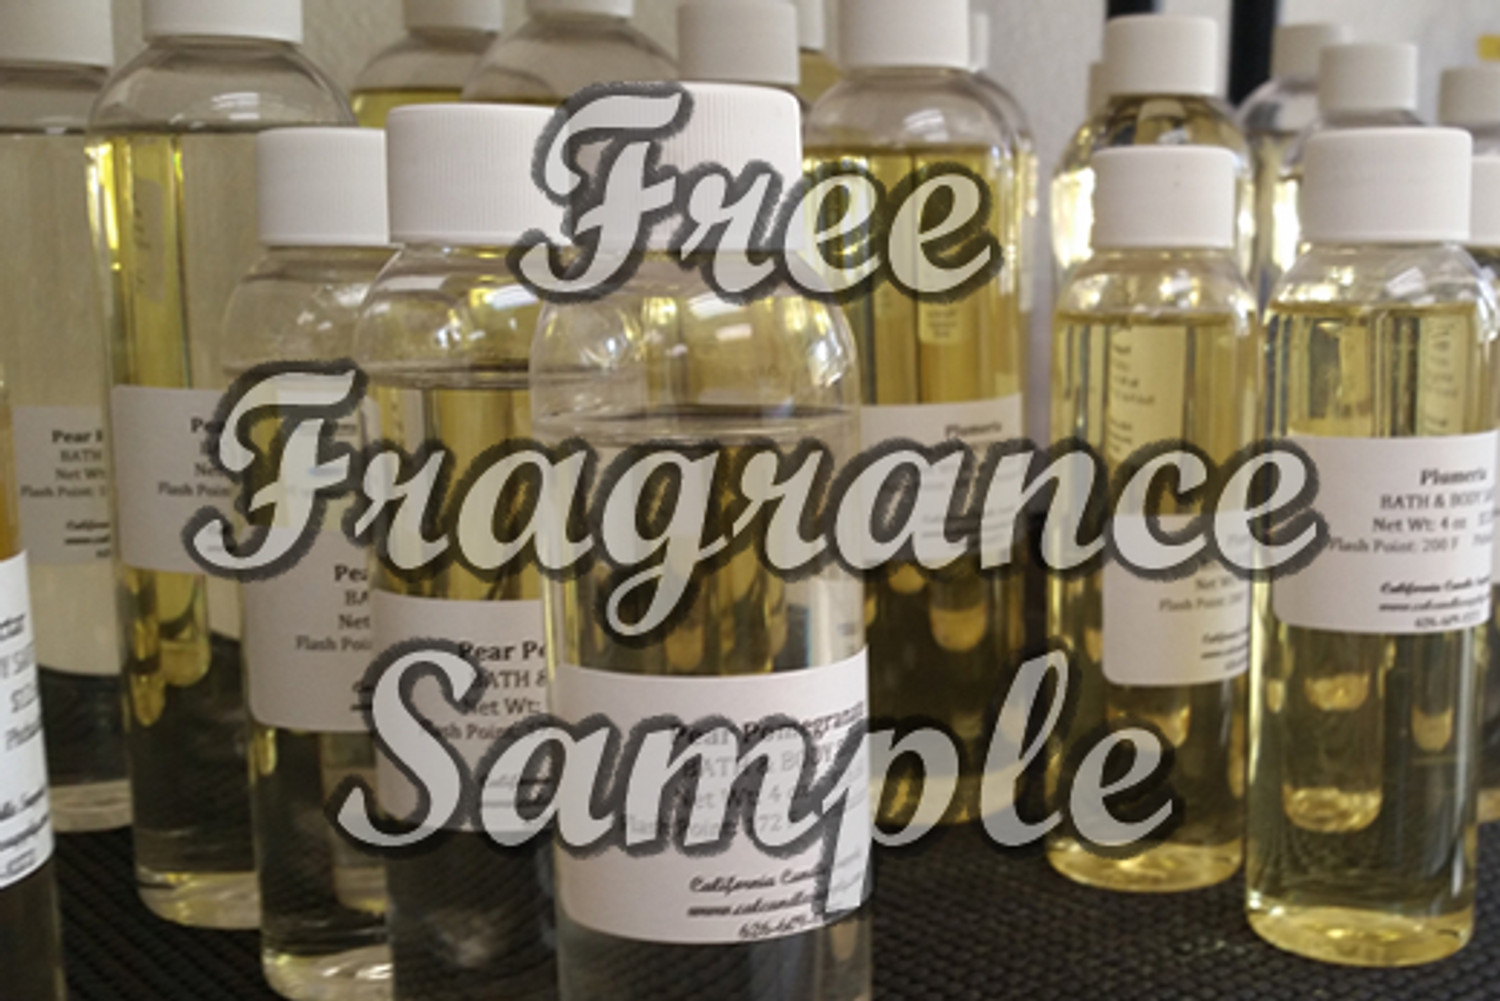 Free scented oil samples